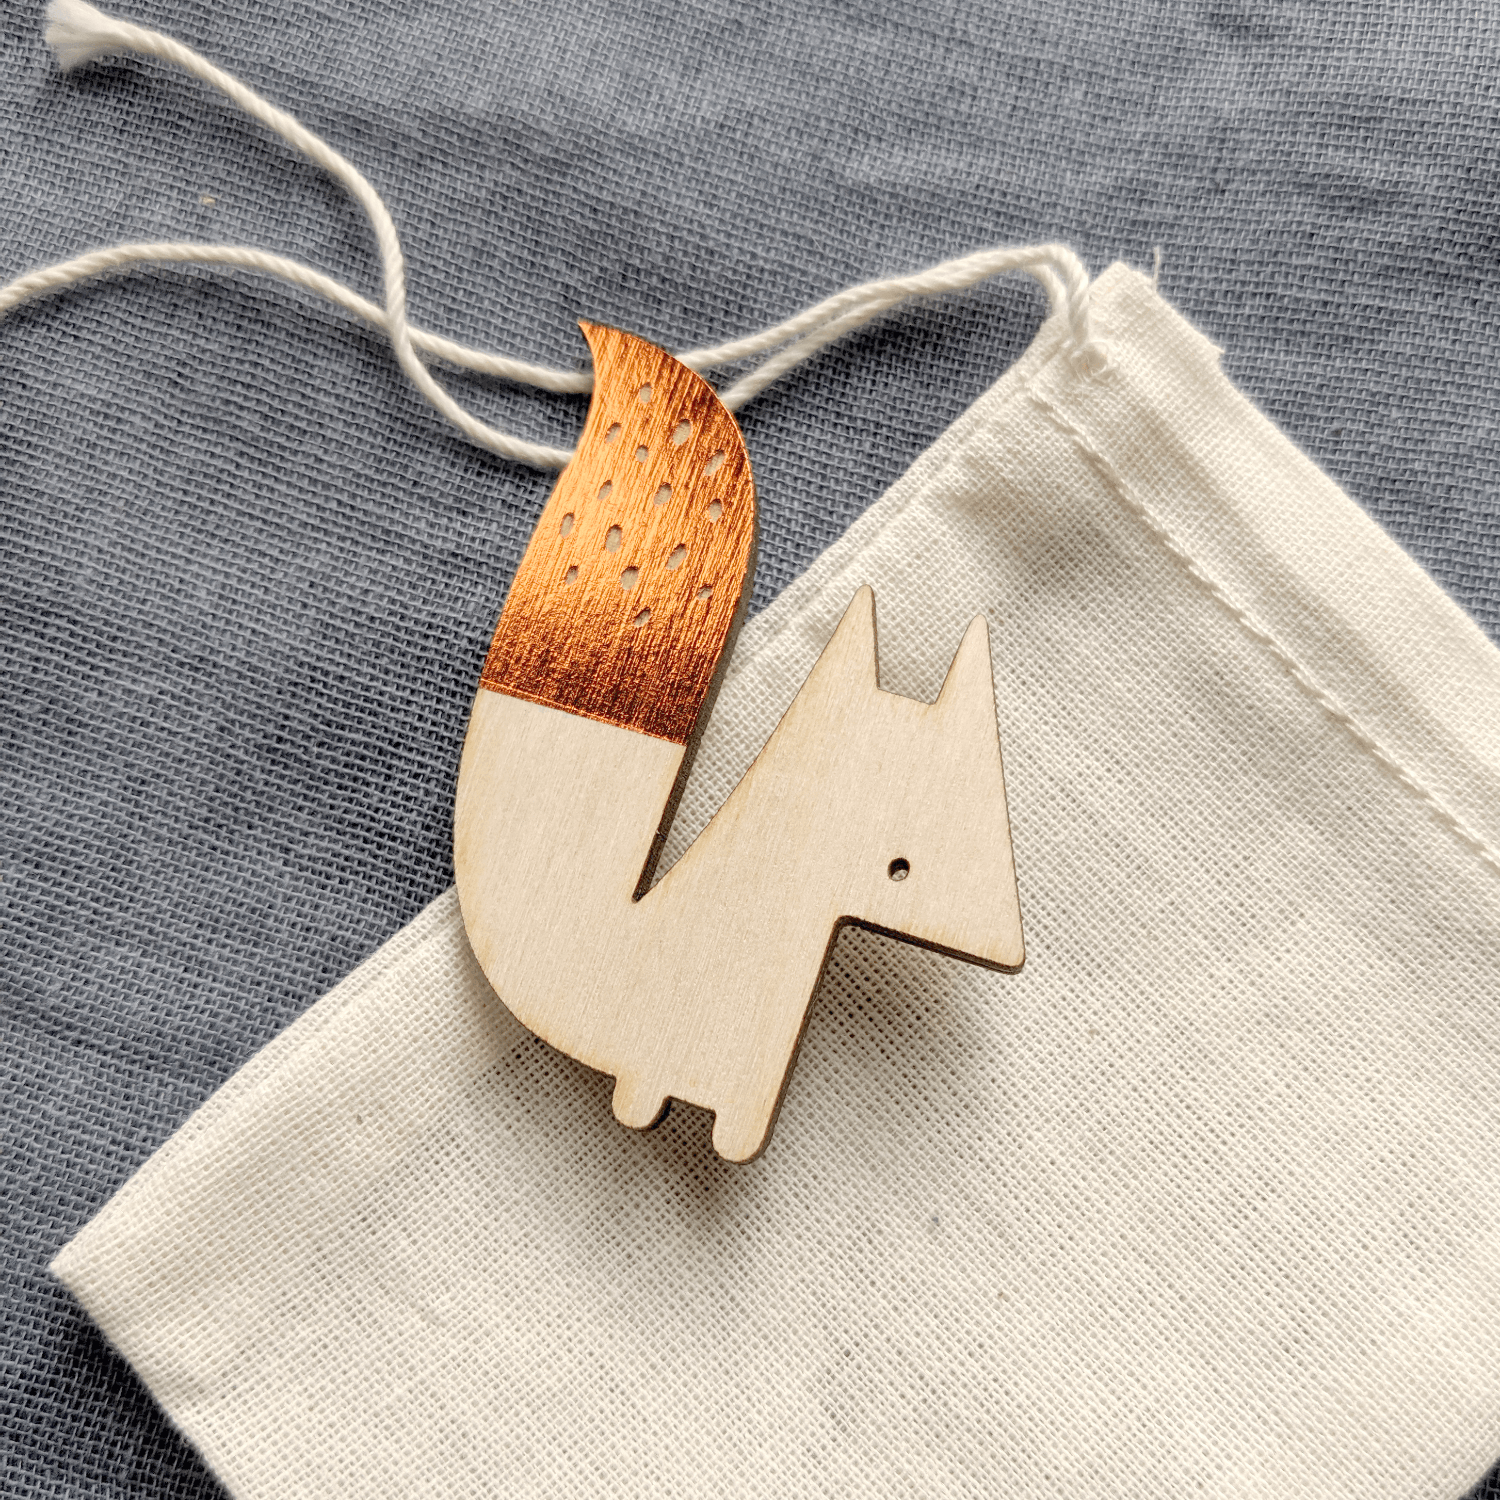 Contemporary Fox Brooch made in the UK - The Moonlit Press